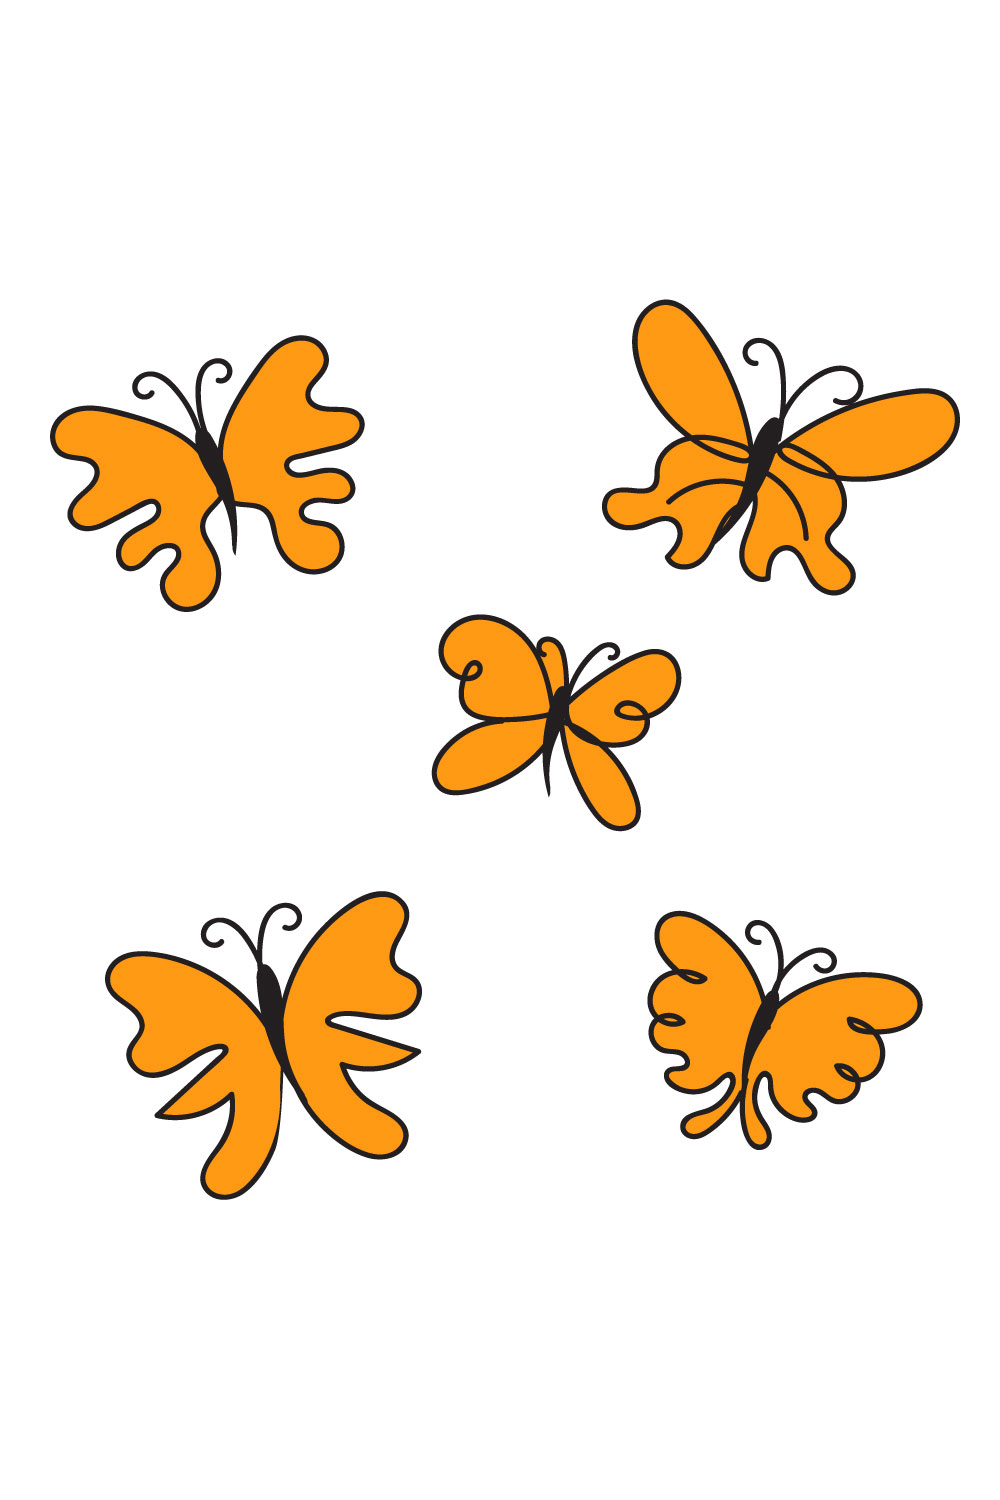 Four orange butterflies flying in the air.